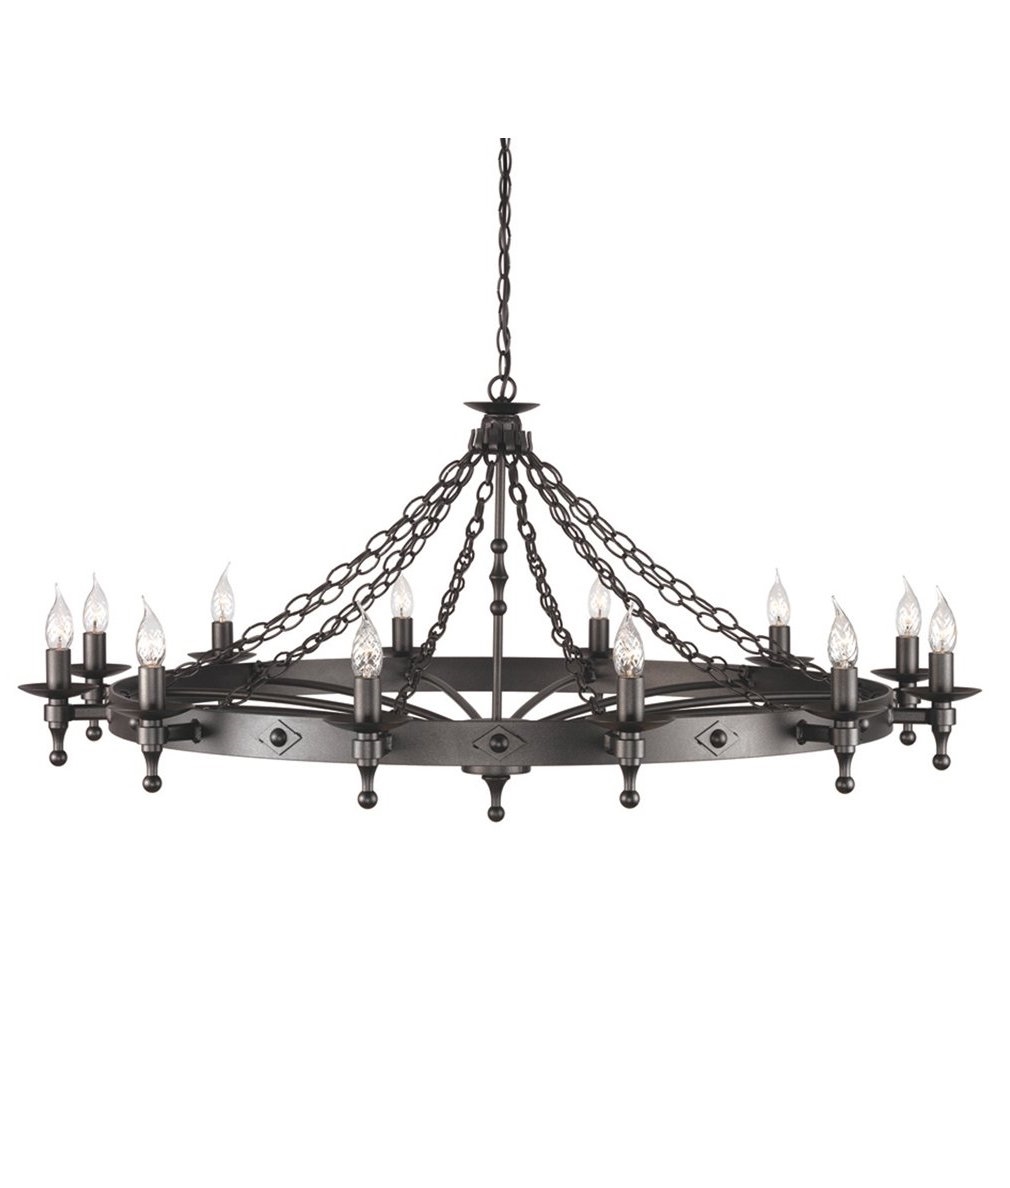 Medieval Style 12 Lamp Chandelier